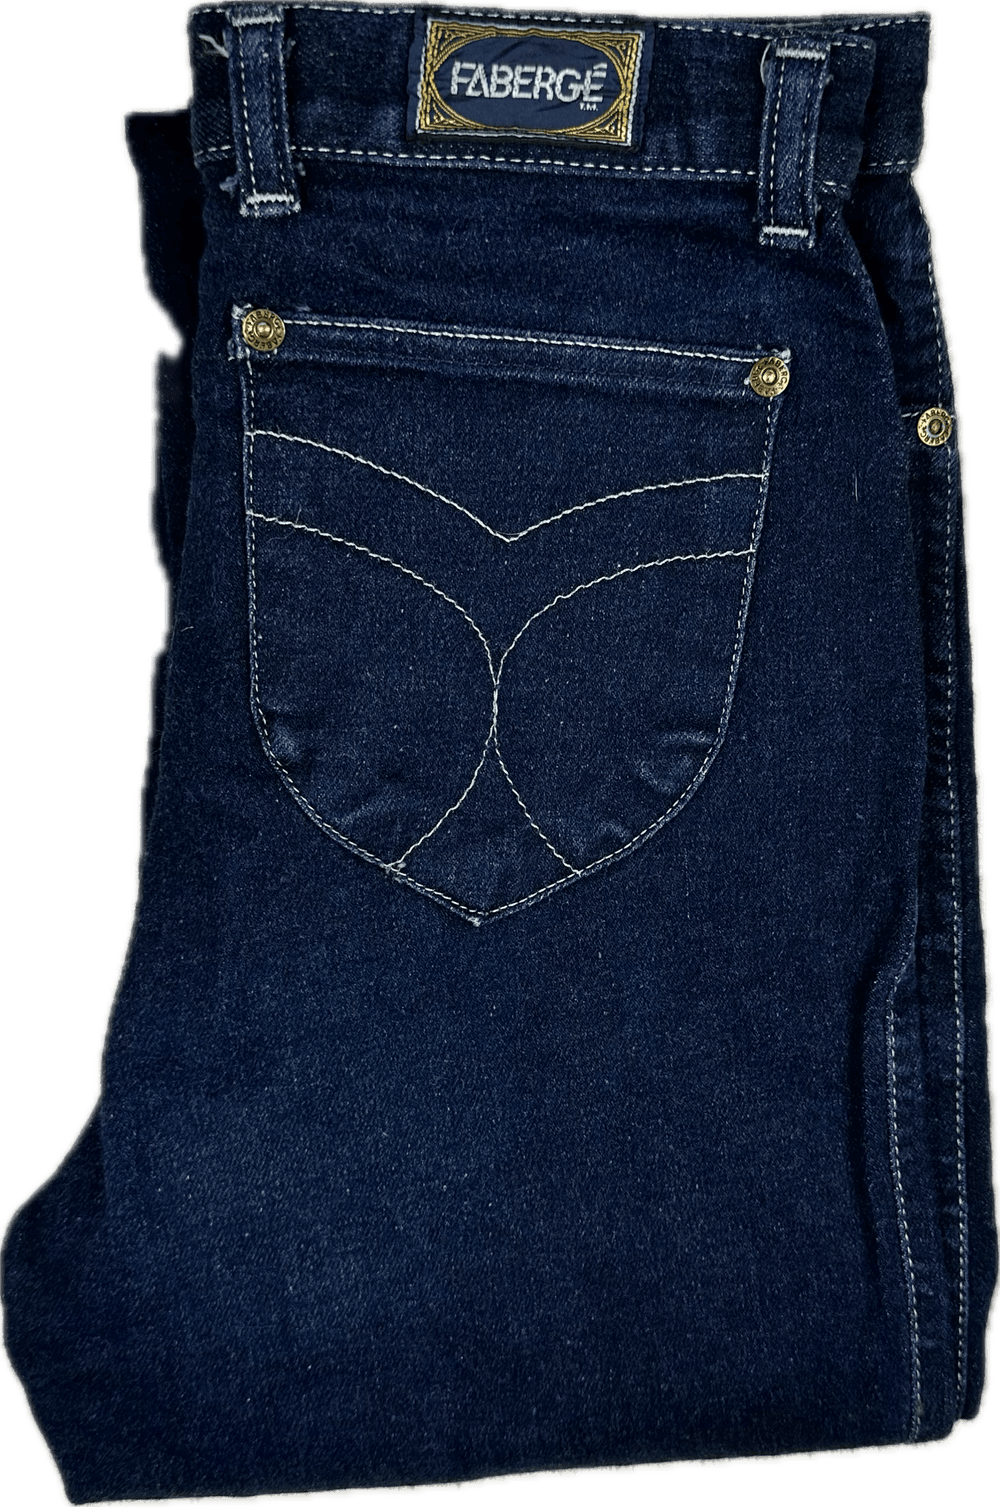 Fabergé 1980's High Waisted Slim Ladies Jeans - Hard to find! - Suit Size 8/9 - Jean Pool